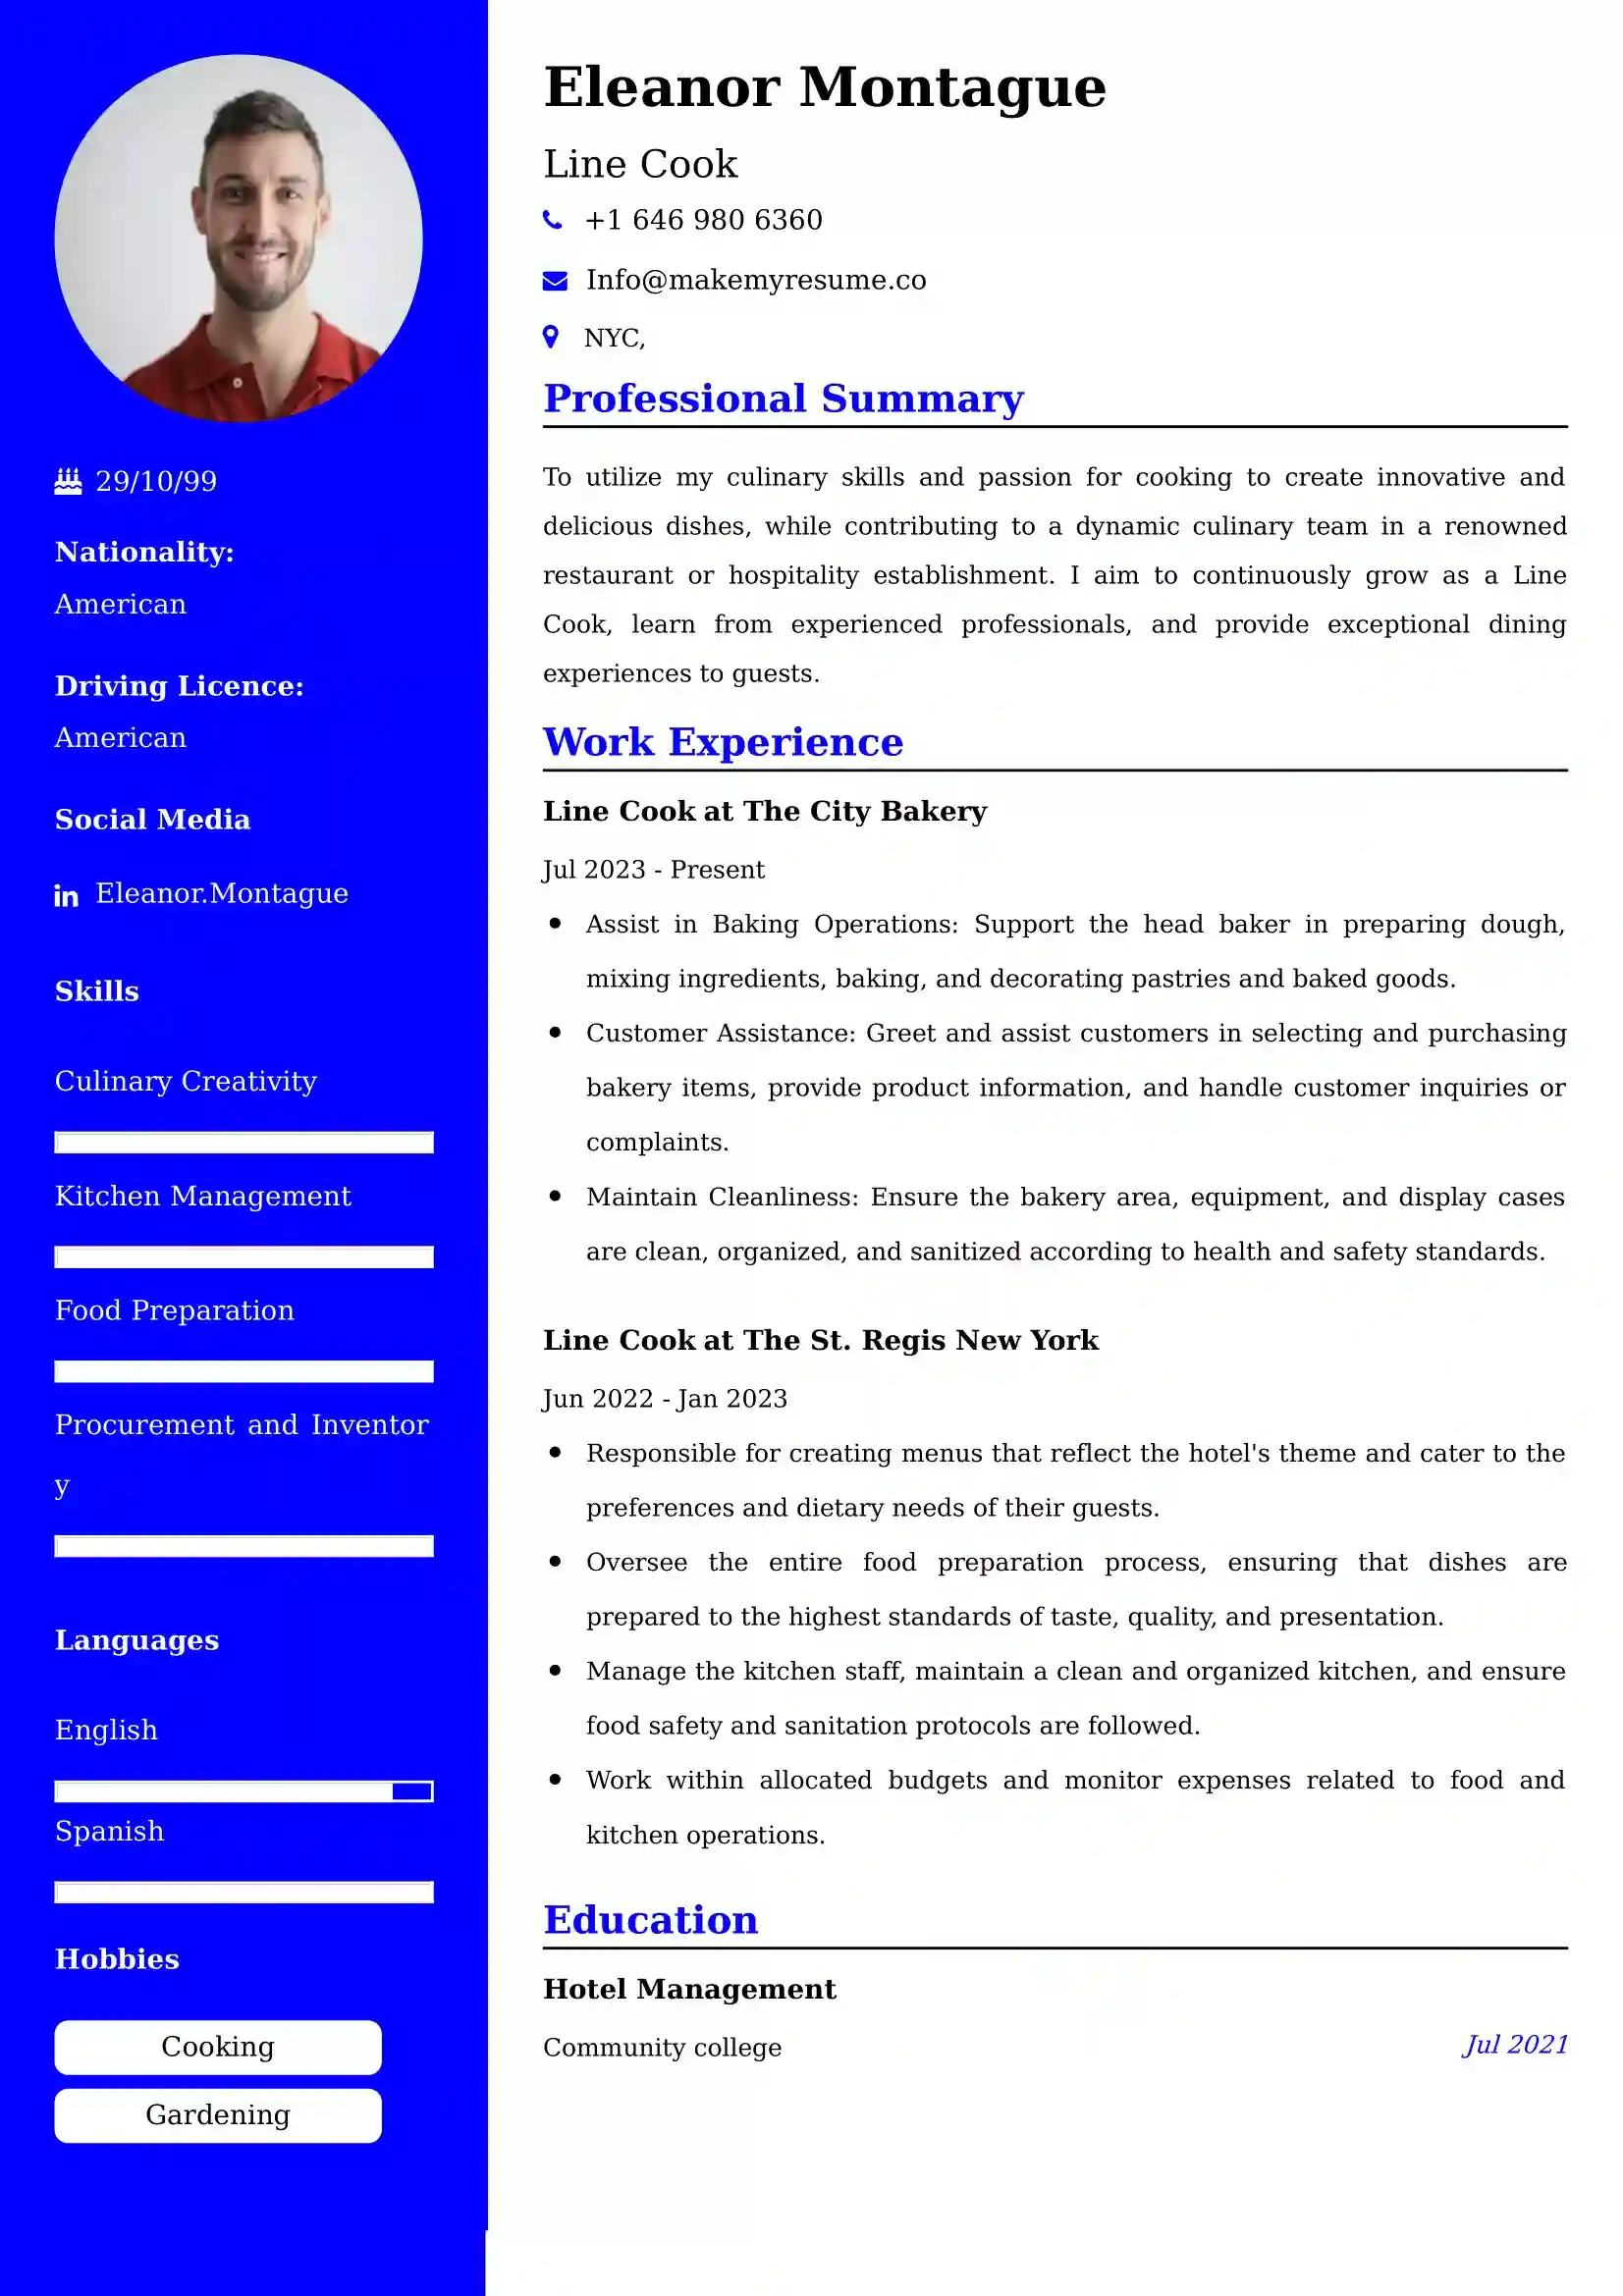 Line Cook Resume Examples India